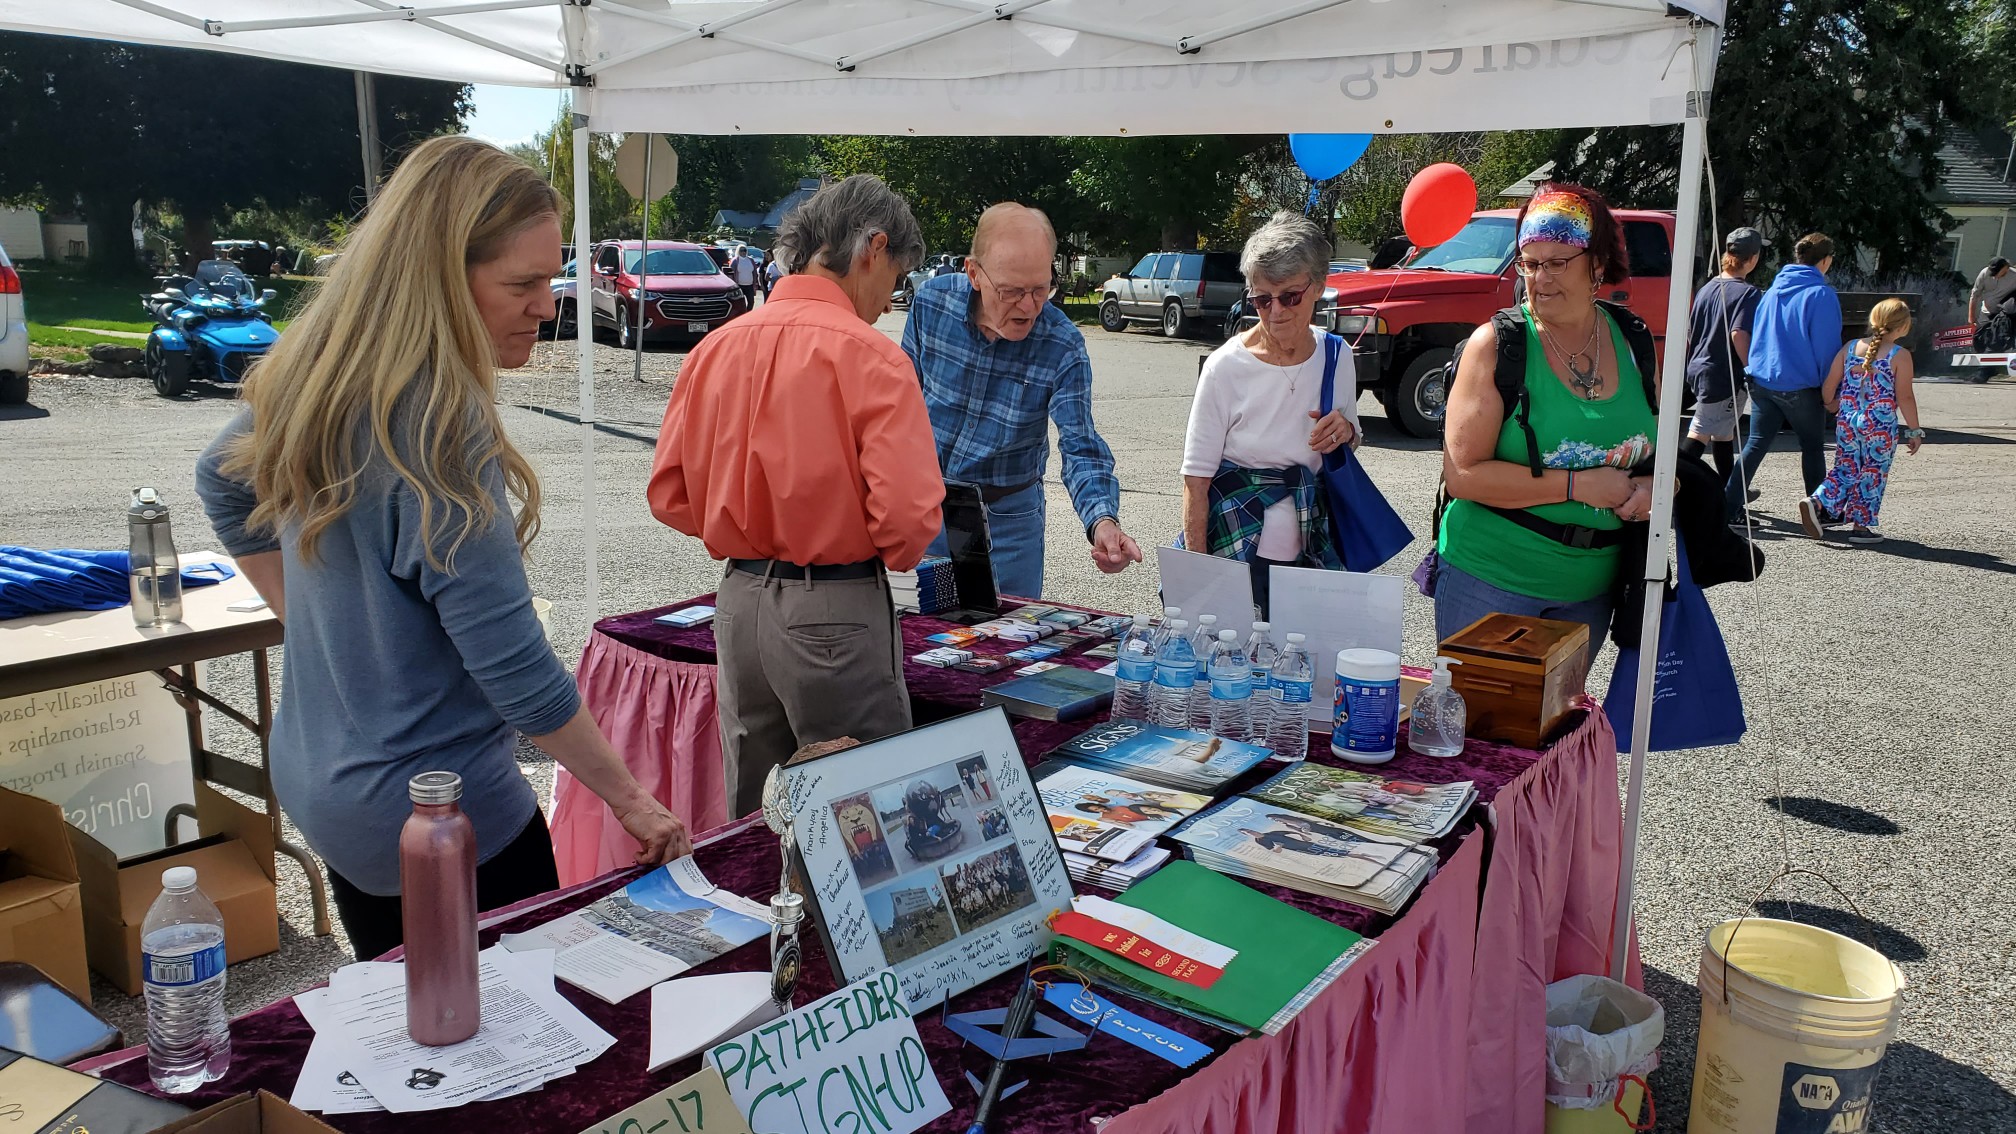 CEDAREDGE ADVENTISTS JOINED THE APPLEFEST MARKETPLACE